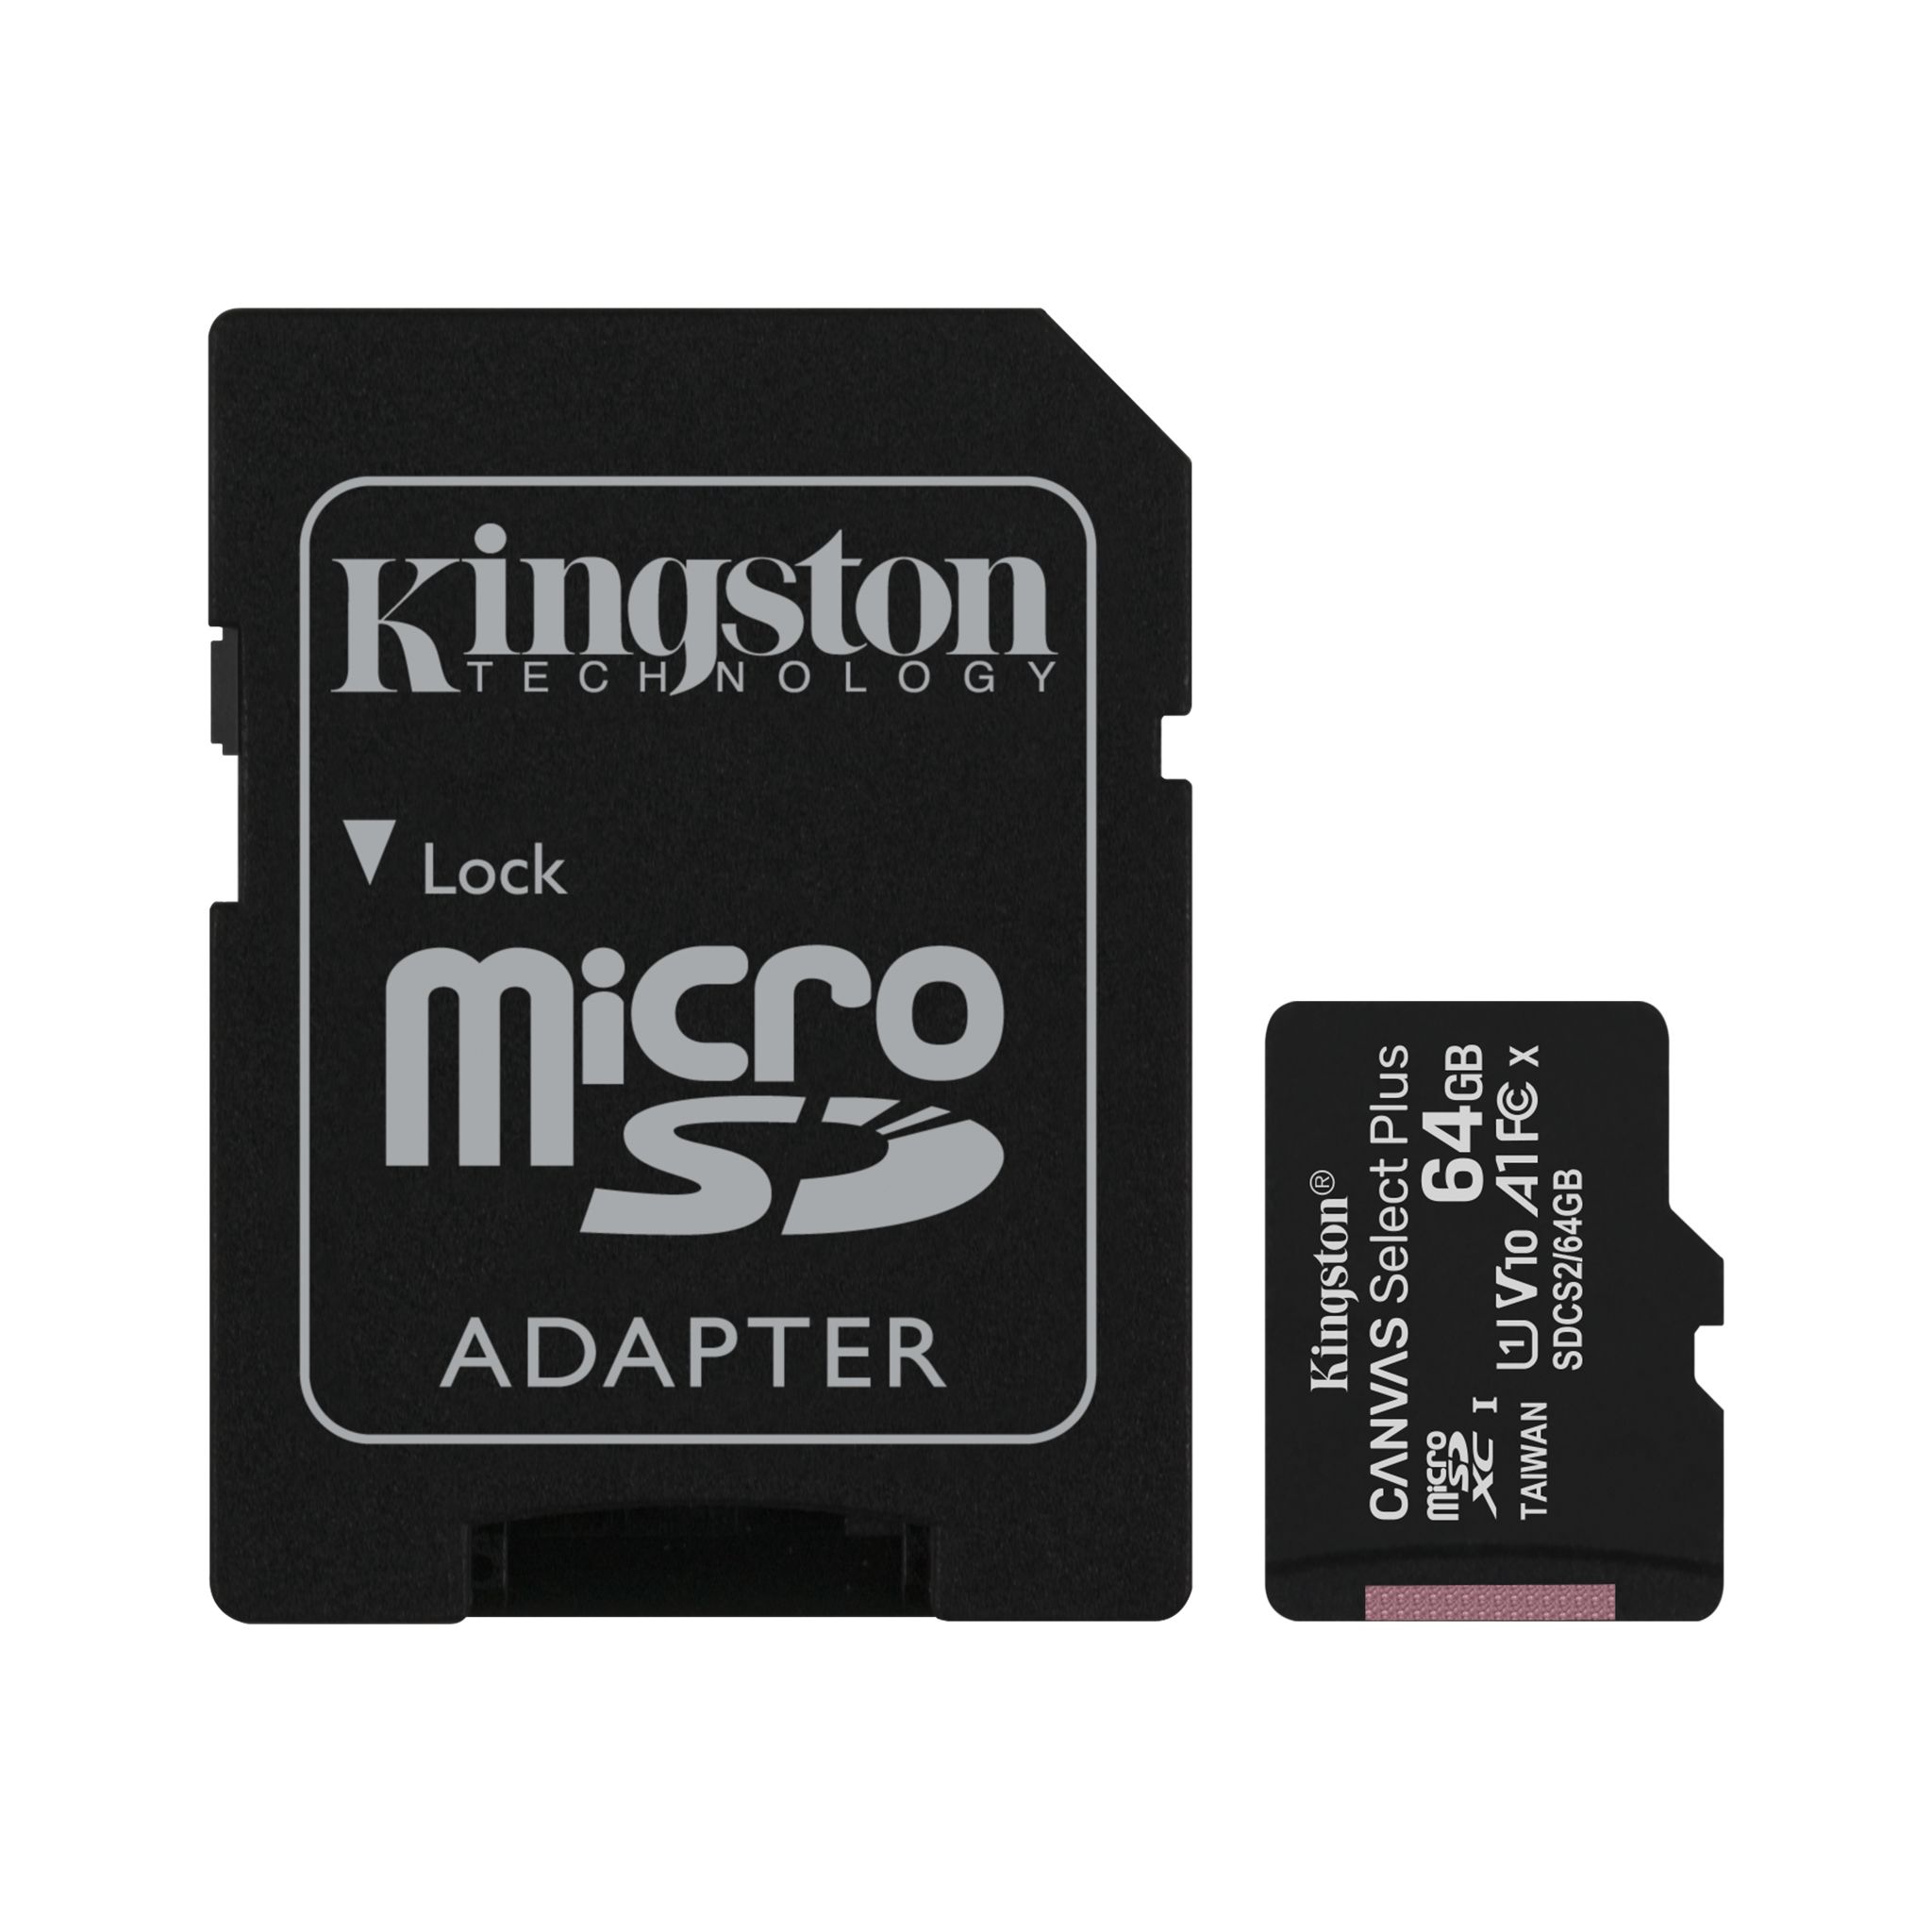 100MBs Works with Kingston Kingston 64GB LG L Prime MicroSDXC Canvas Select Plus Card Verified by SanFlash.